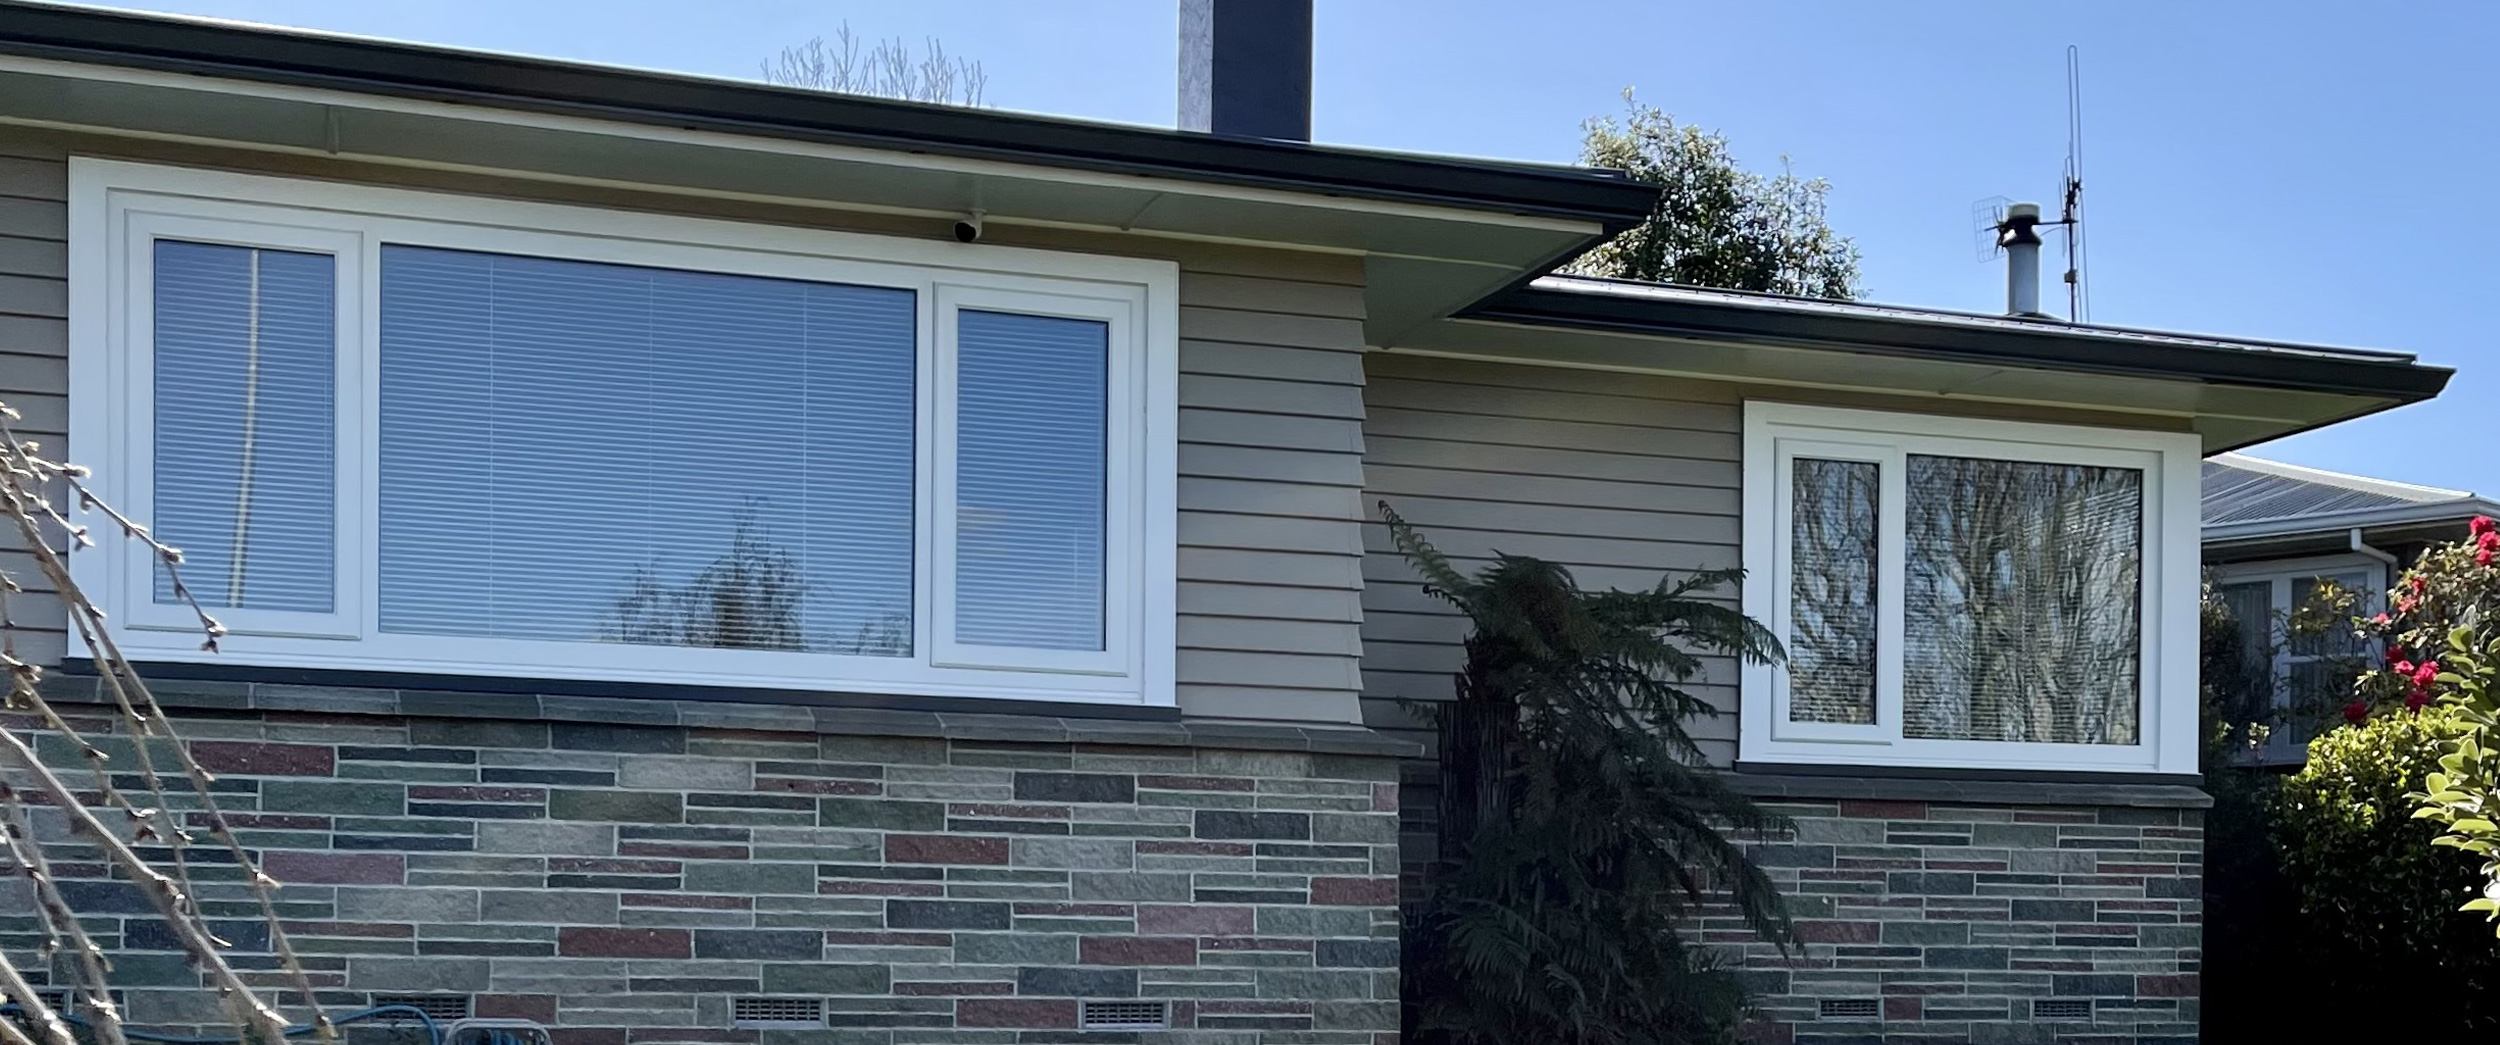 Existing Home Retrofitted with new Double Glazed, Premium NZ Made uPVC Windows and Doors